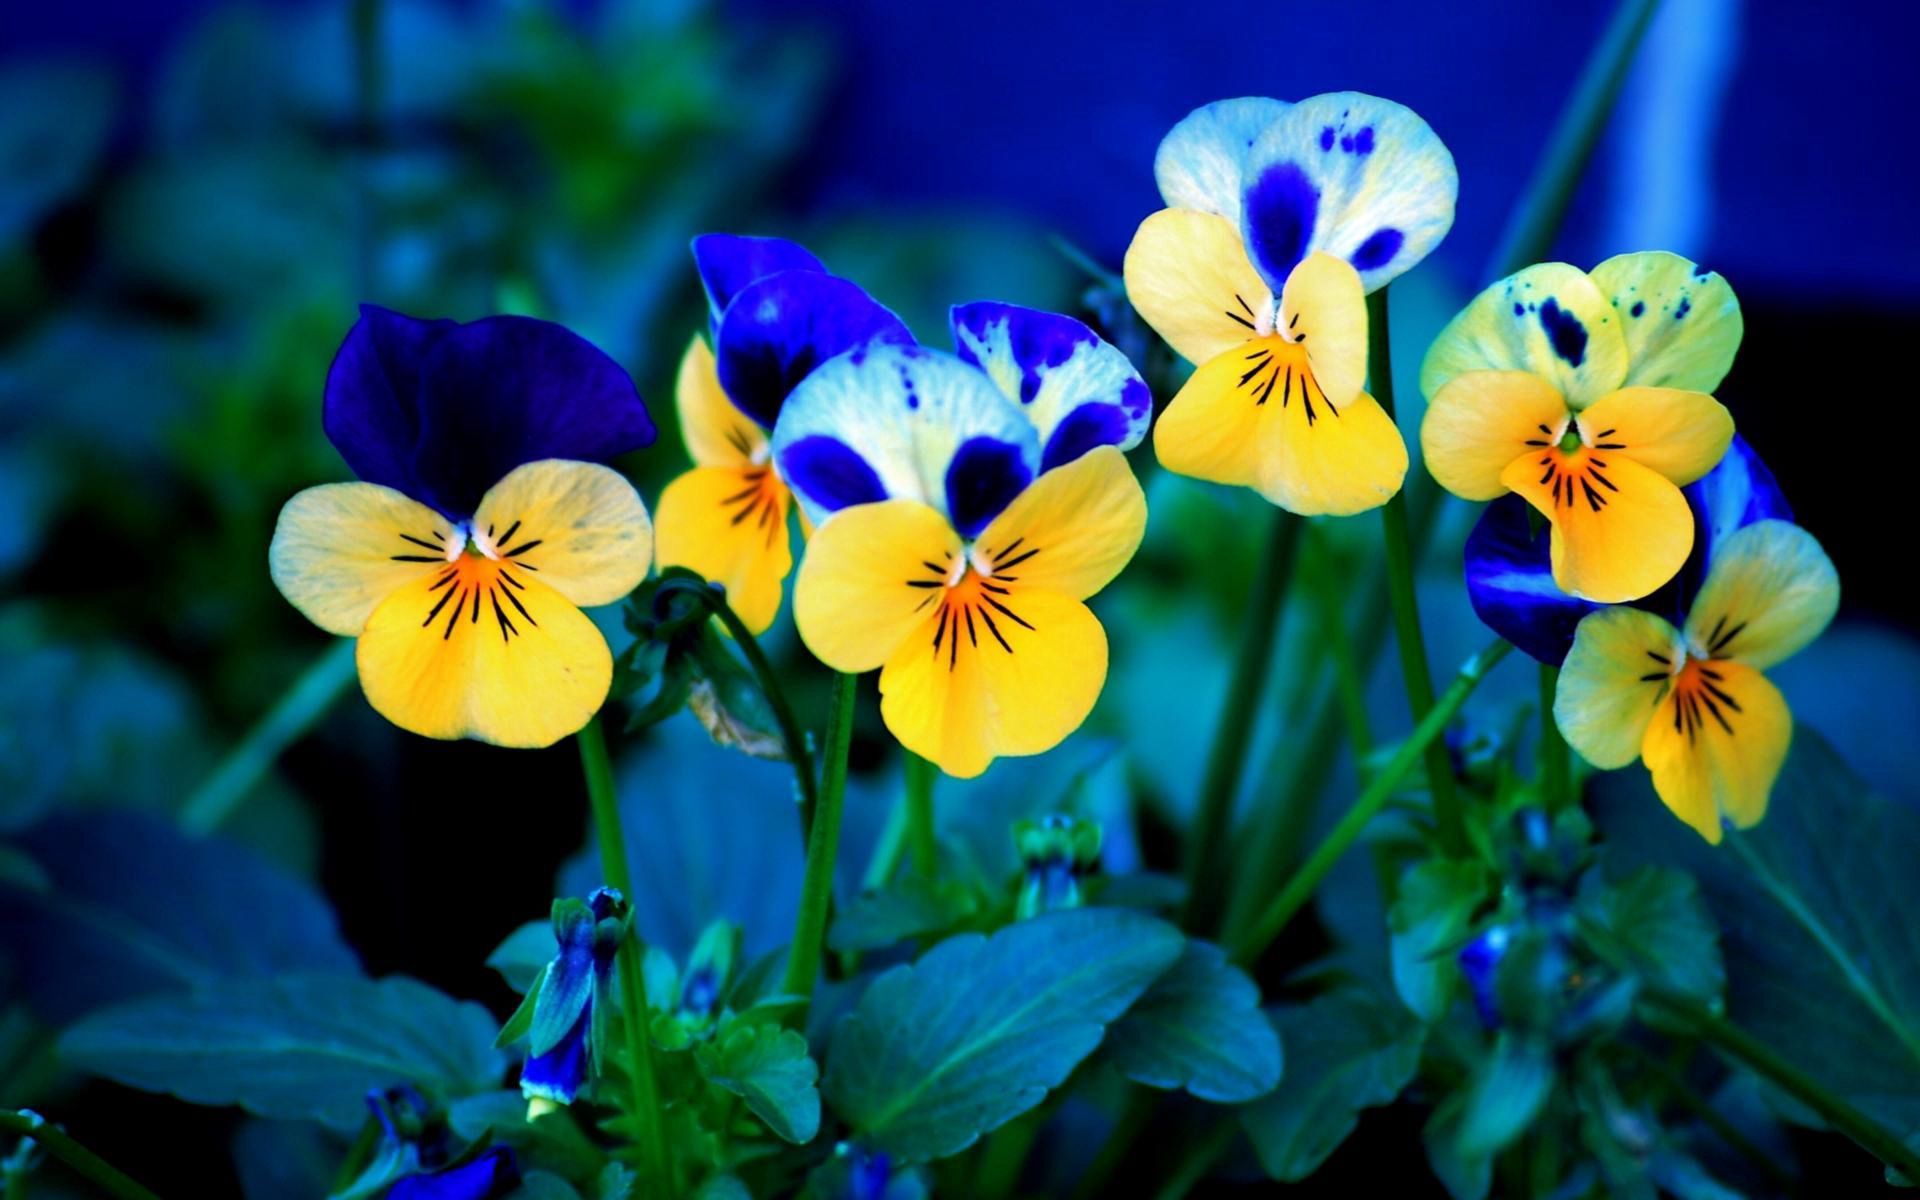 pansies, flowers, polyana, glade High Definition image